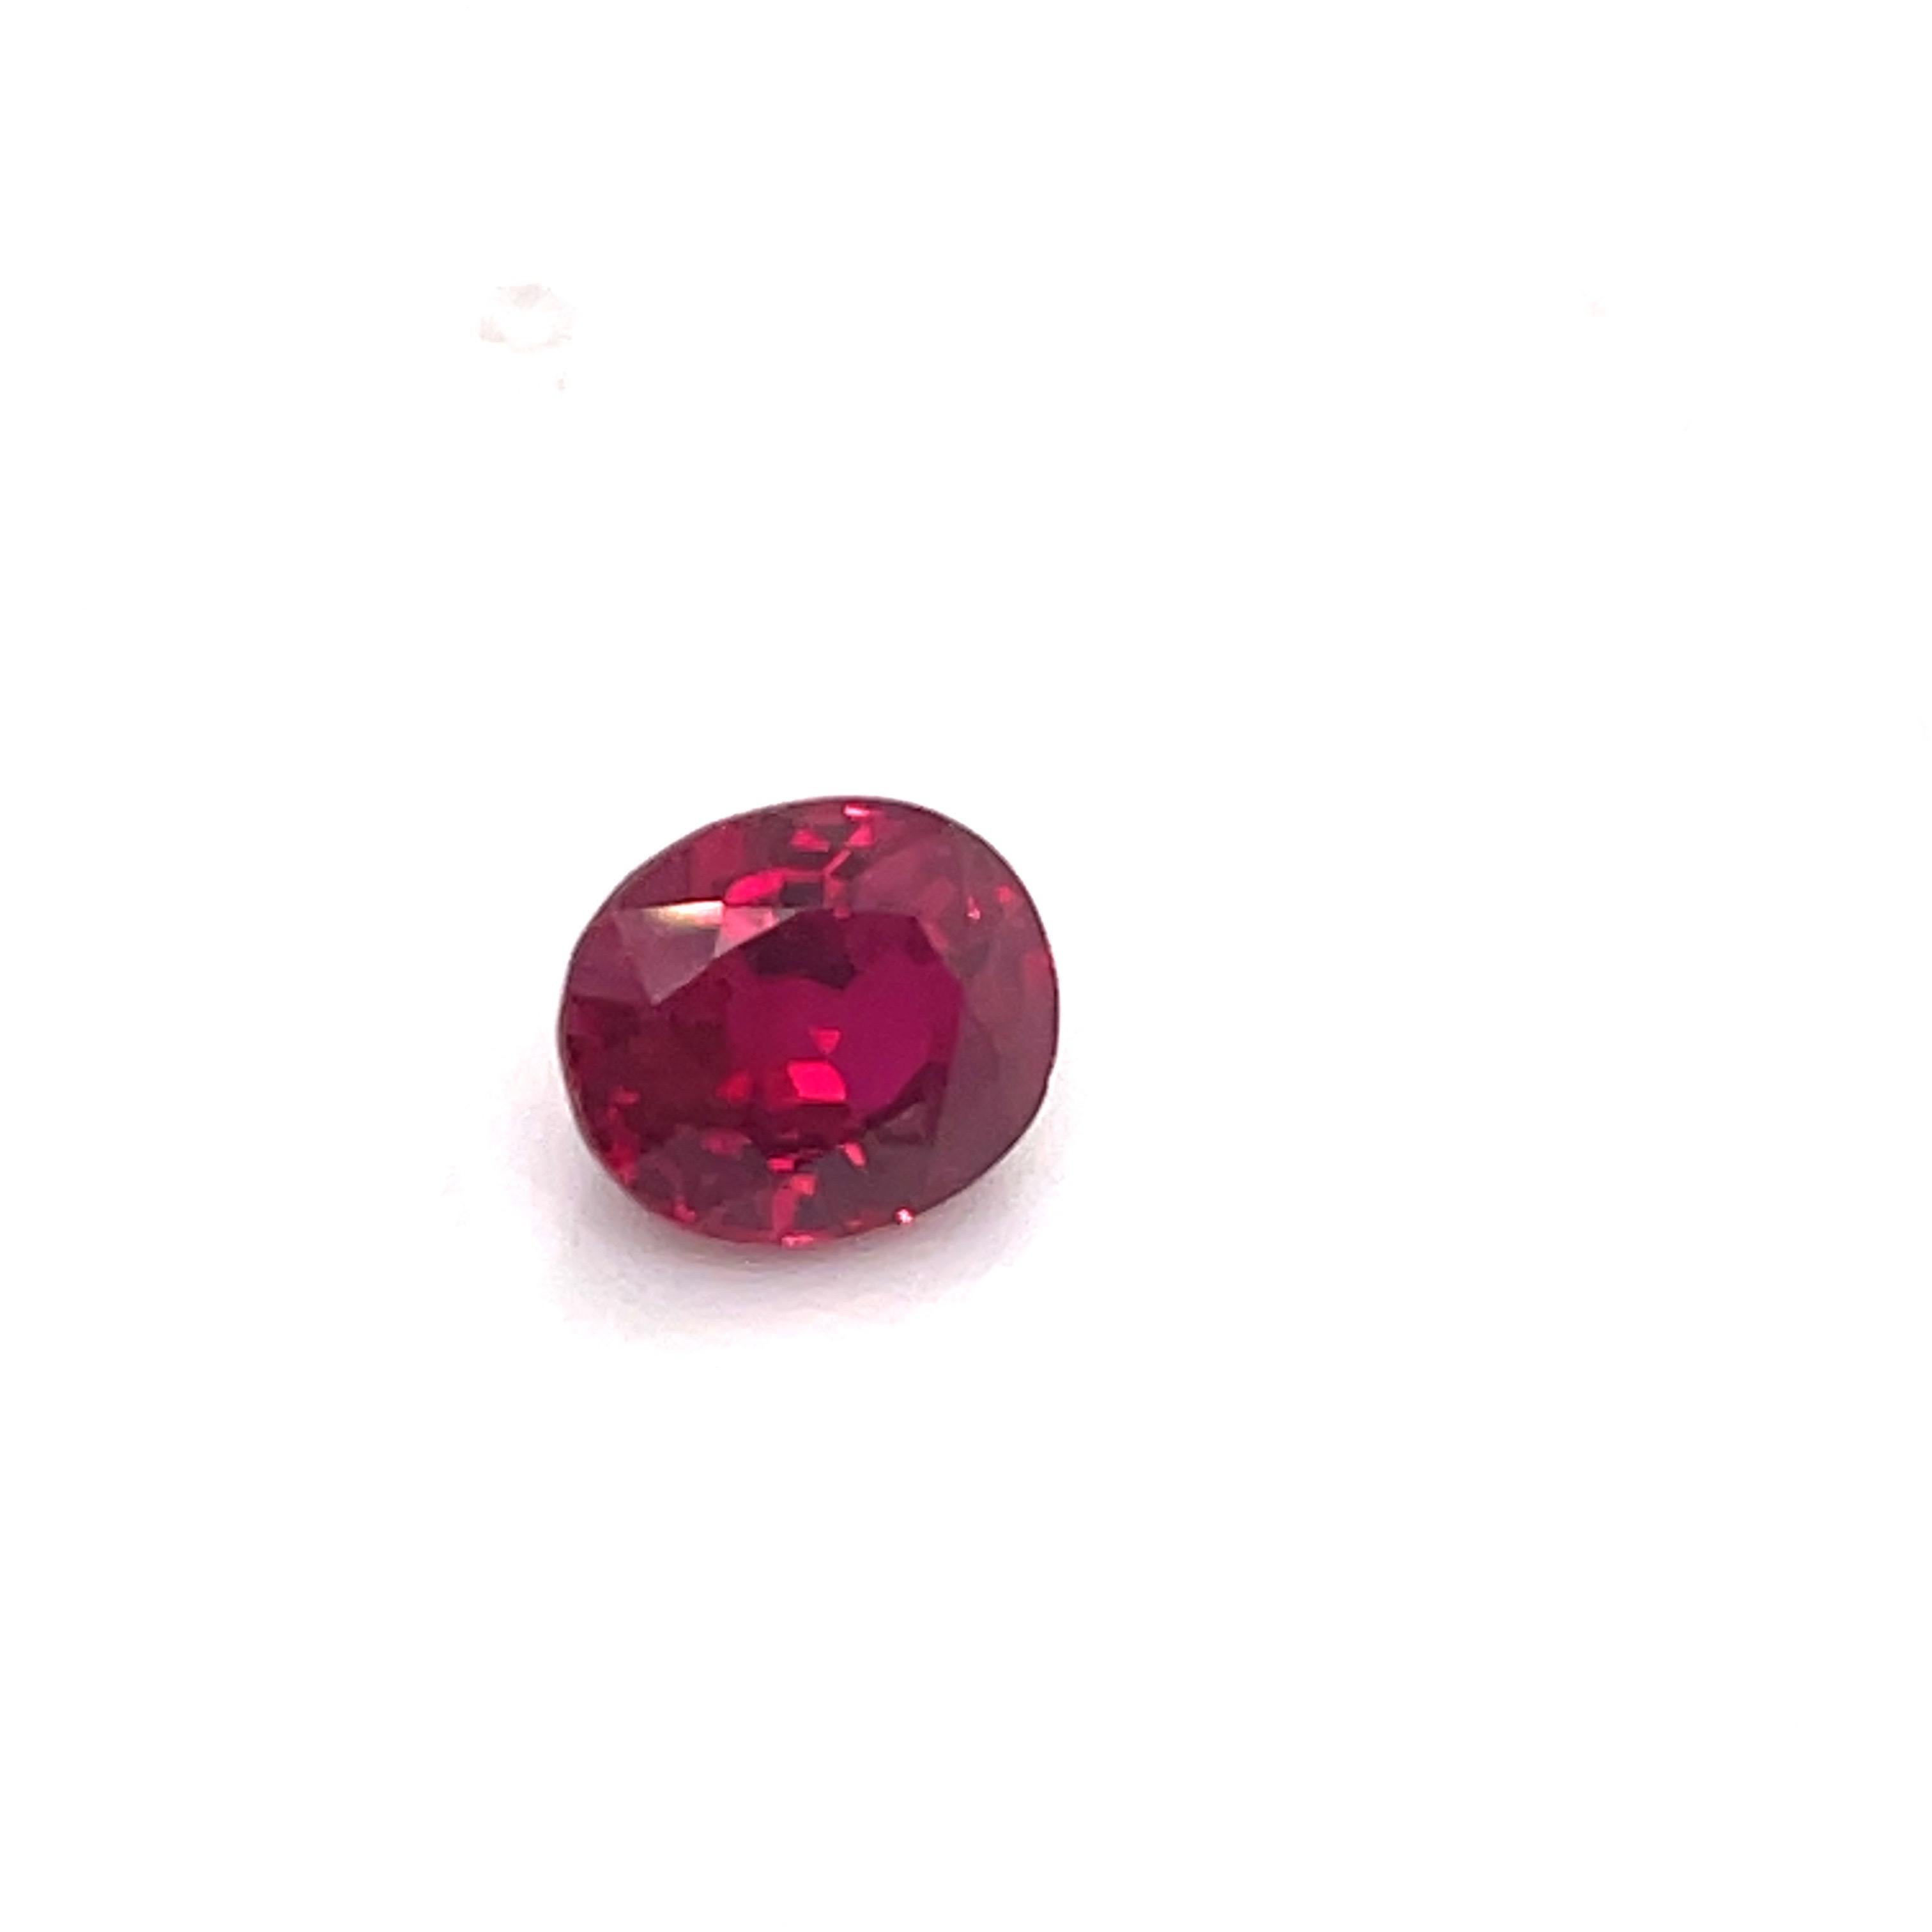 GRS & GIA Certified Oval shape red Ruby weighing 3.16 Carats and measuring 8.90 x 7.50 MM, Burma. Heated.
Can customize in a ring, pendant or bracelet. 
More Rubies in stock.
Email for more details. 

Beautiful Fire Red Color!